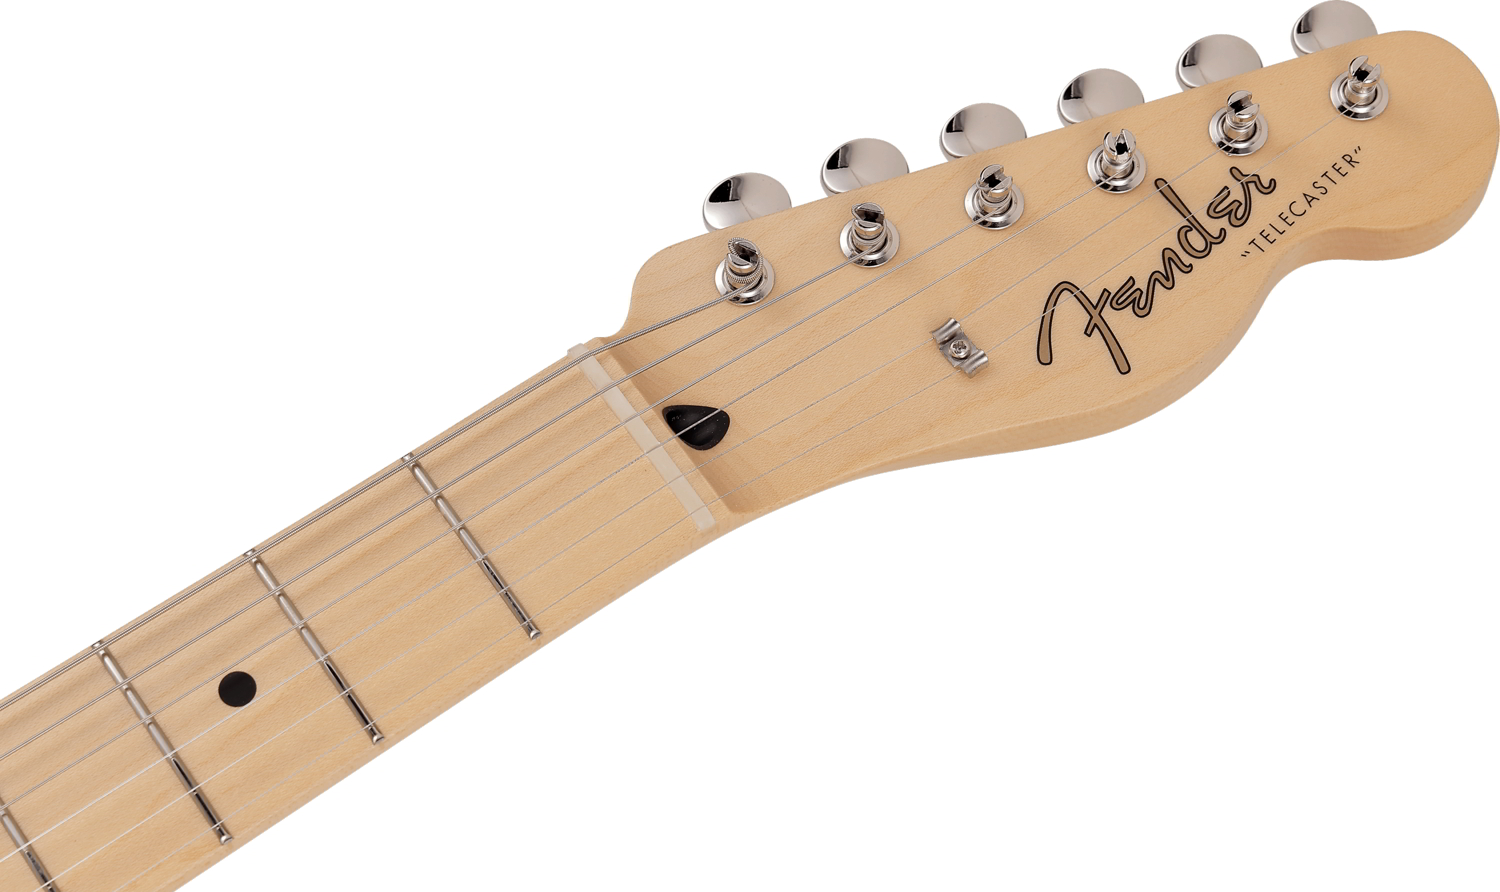 Made in Japan Junior Collection Telecaster®, Maple Fingerboard, Arctic White追加画像